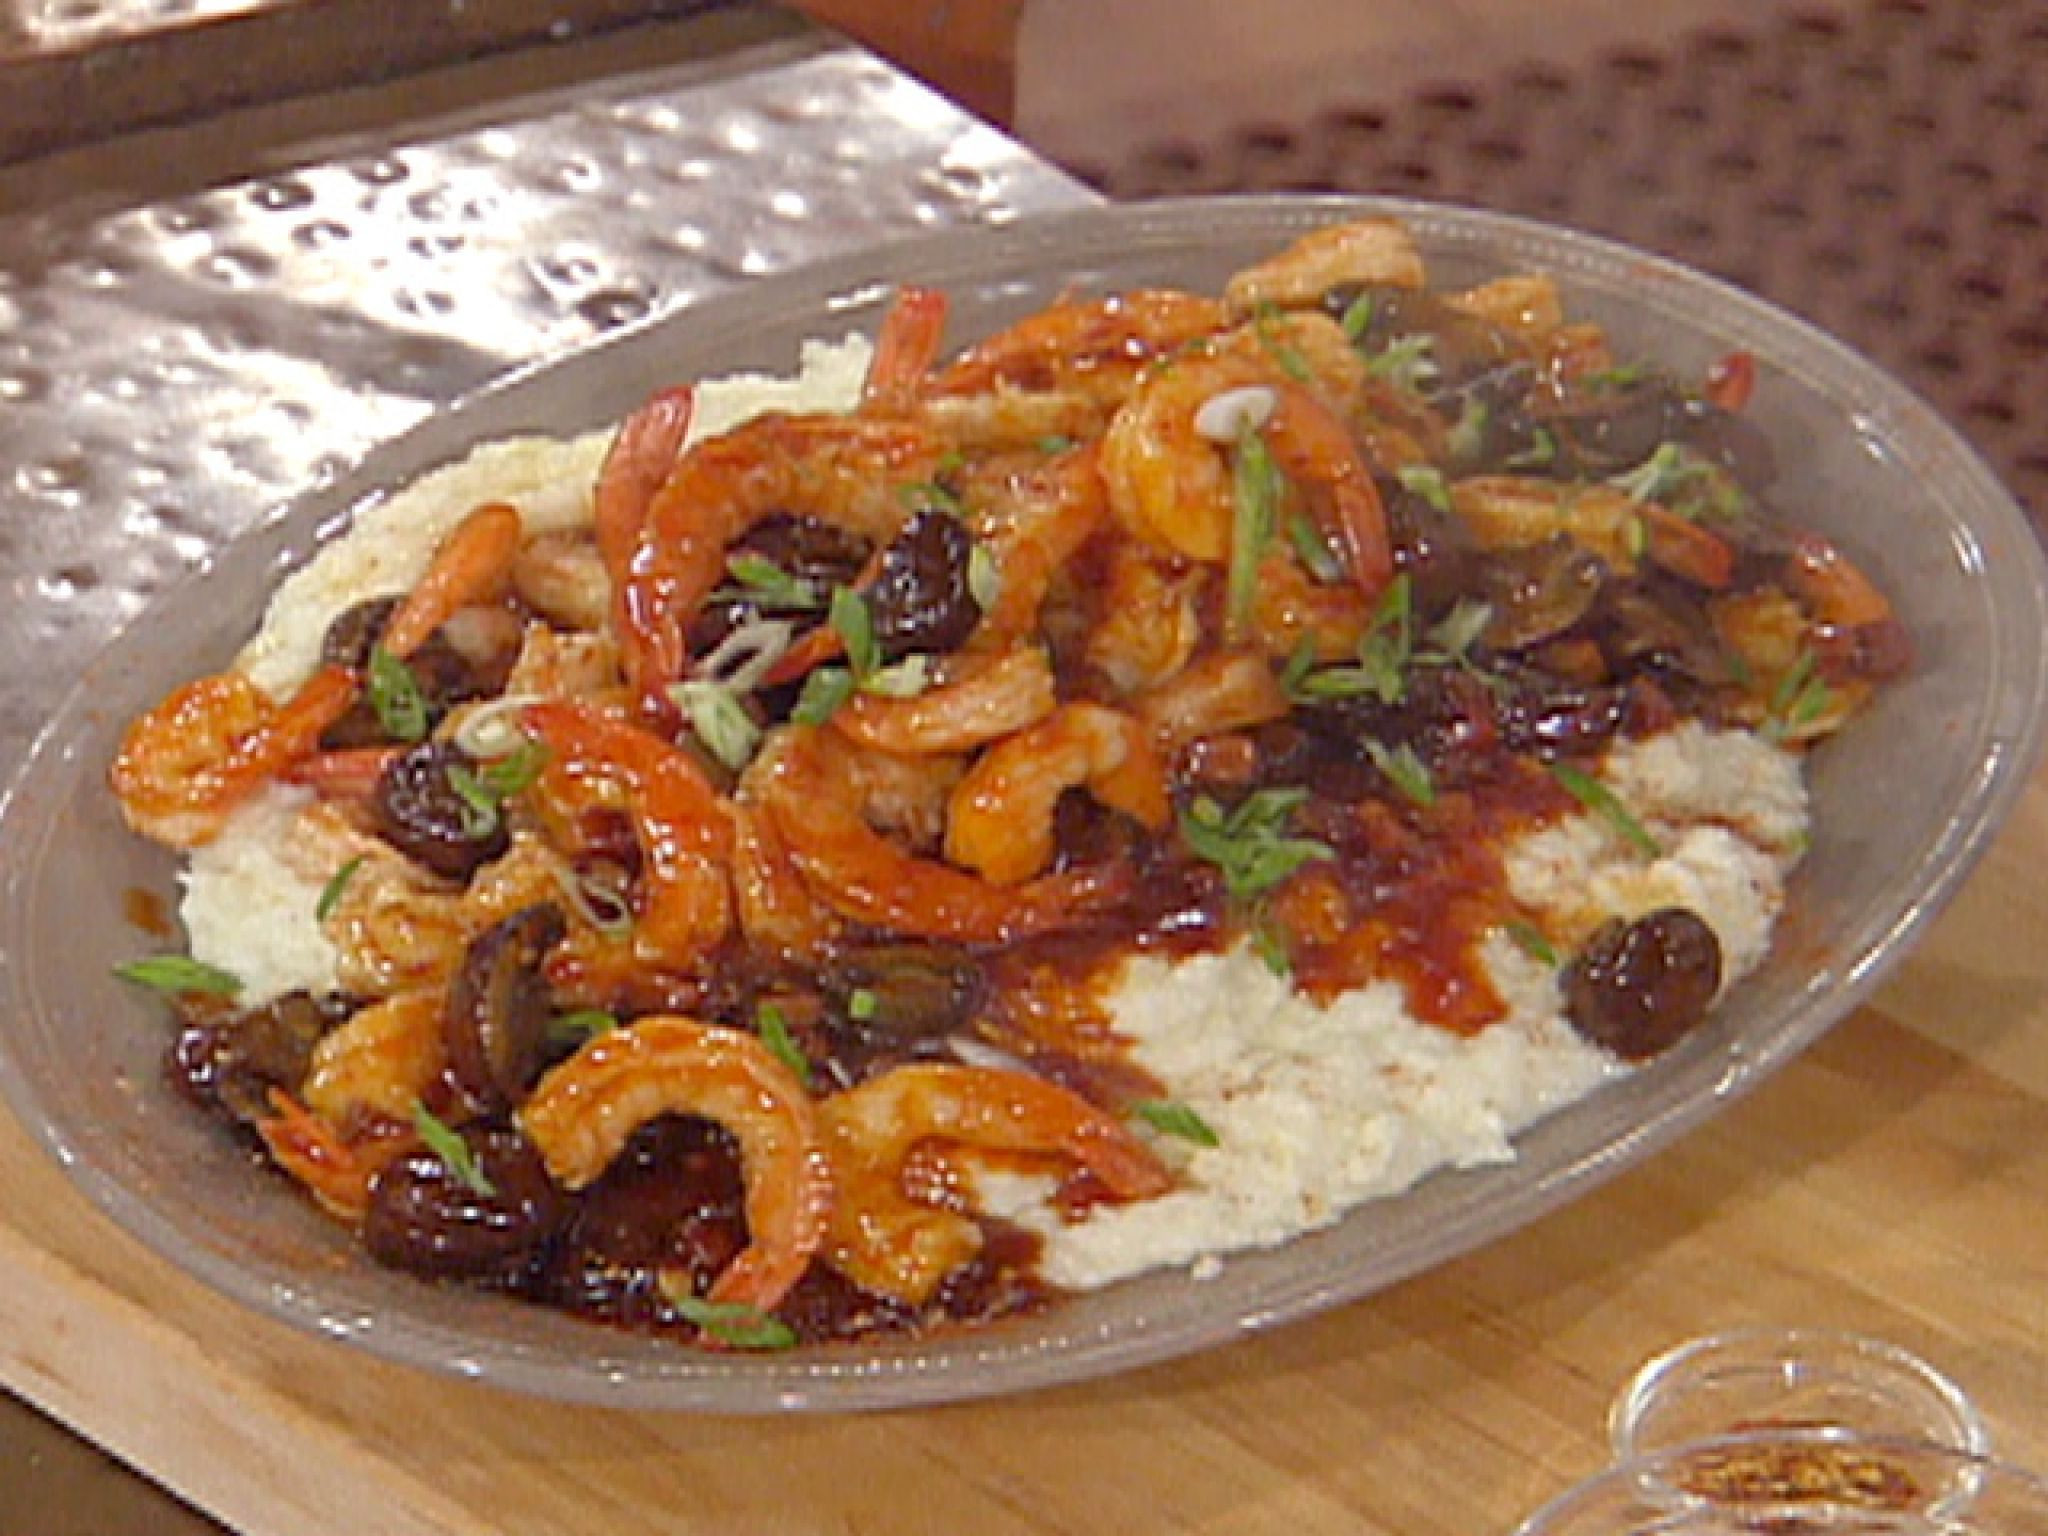 Emeril Lagasse Shrimp And Grits
 Nola s Shrimp and Smoked Cheddar Grits recipe from Emeril